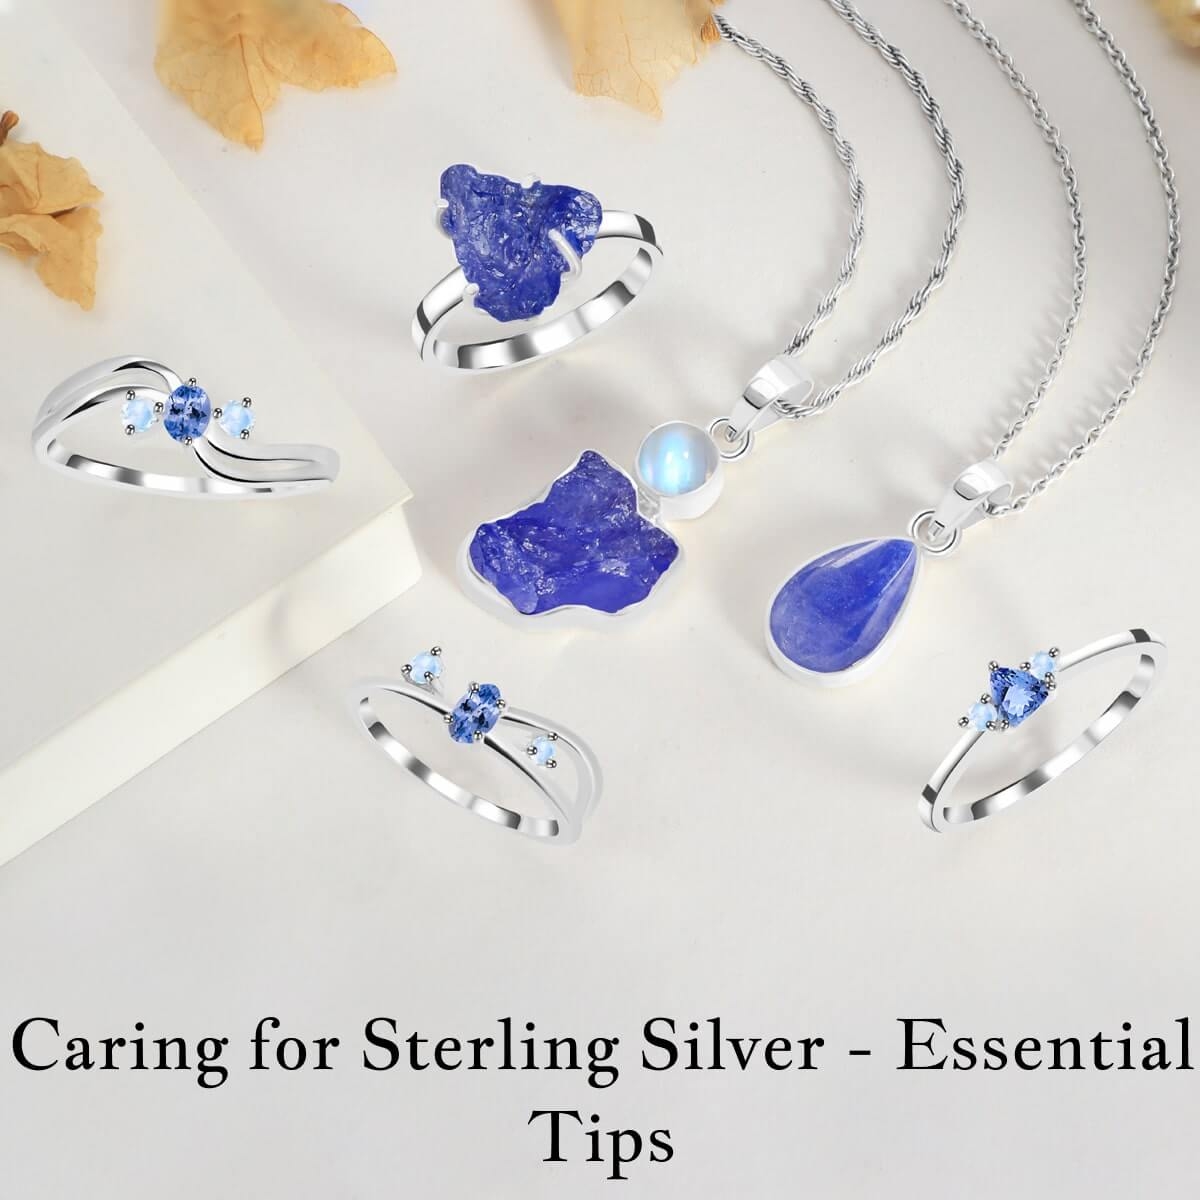 How to Care for Your Sterling Silver Jewelry